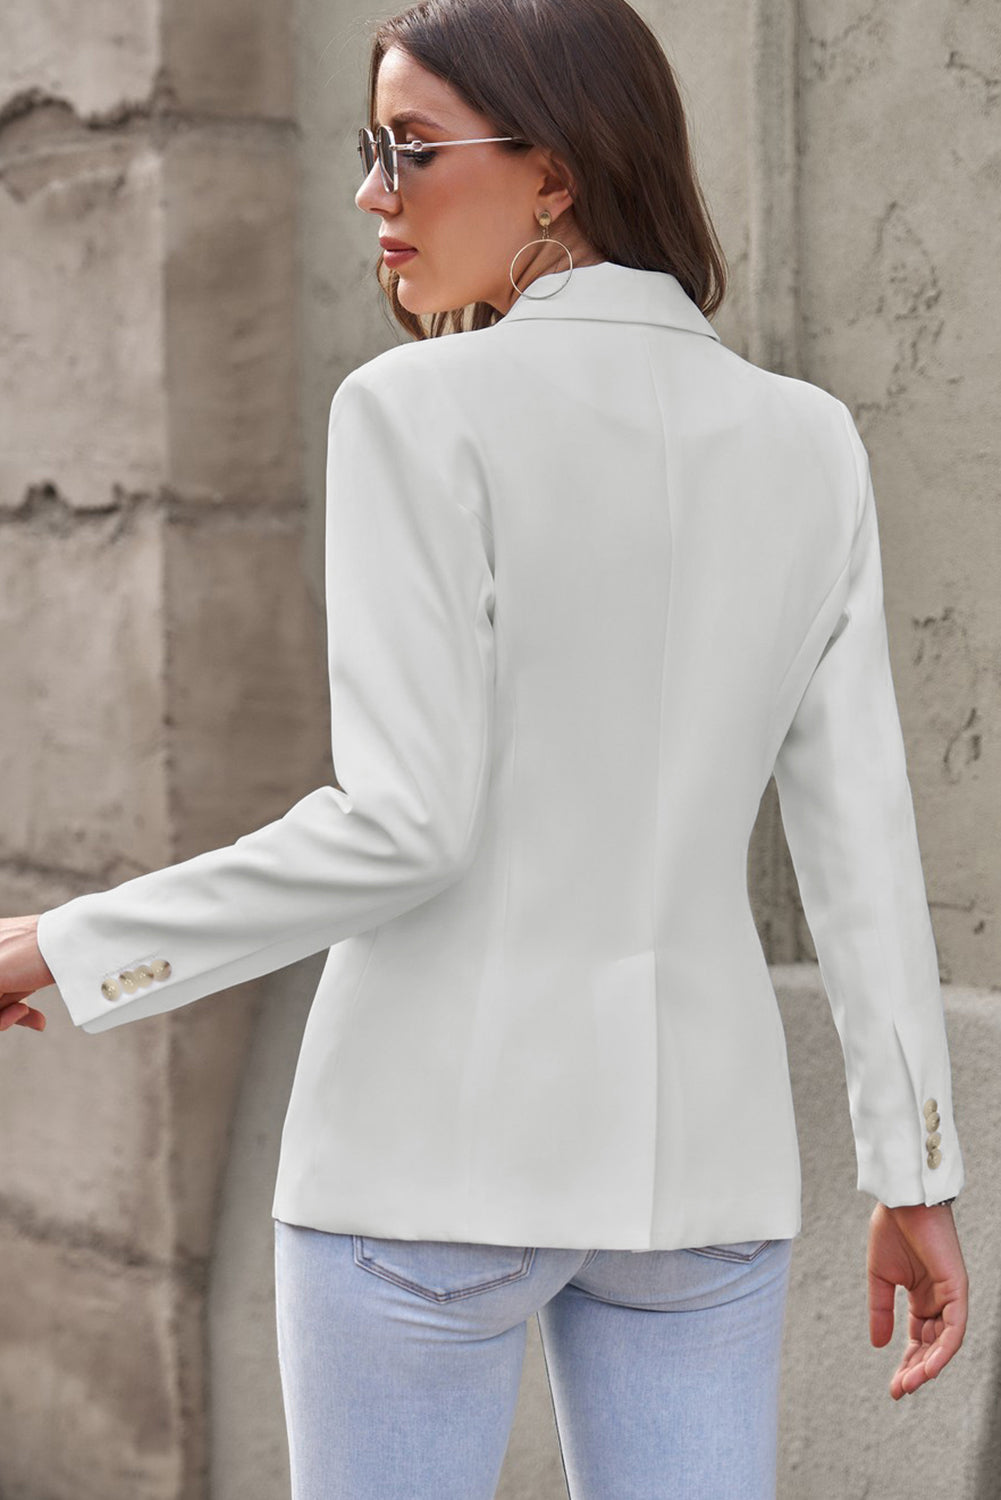 Flap pocket blazer, emphasizing its structured silhouette and functional flap pockets, merging fashion with utility.